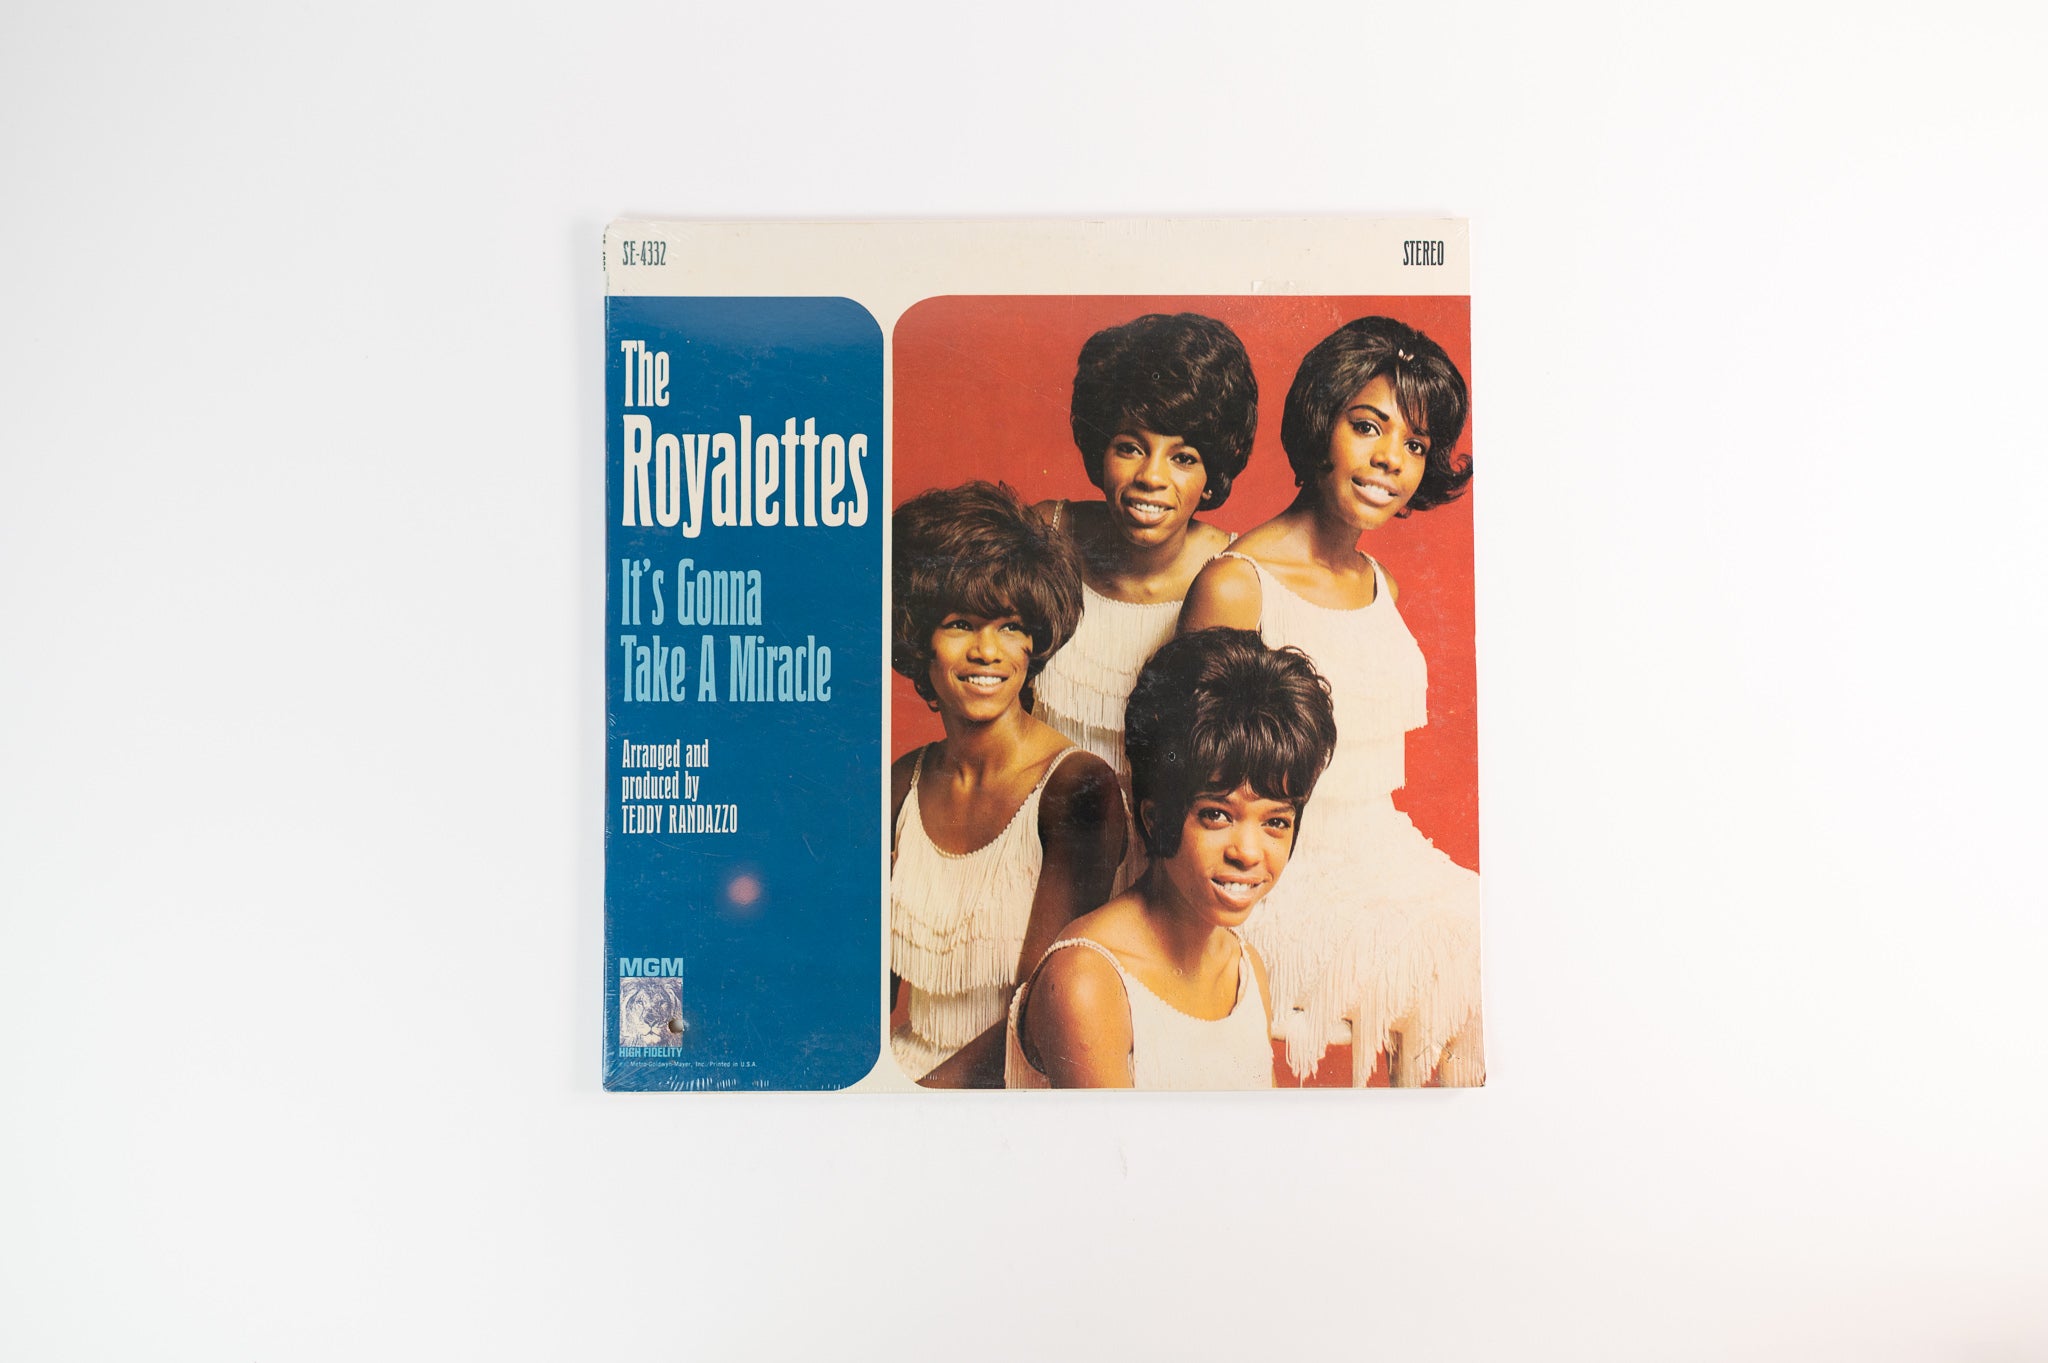 The Royalettes - It's Gonna Take A Miracle on MGM Stereo Sealed